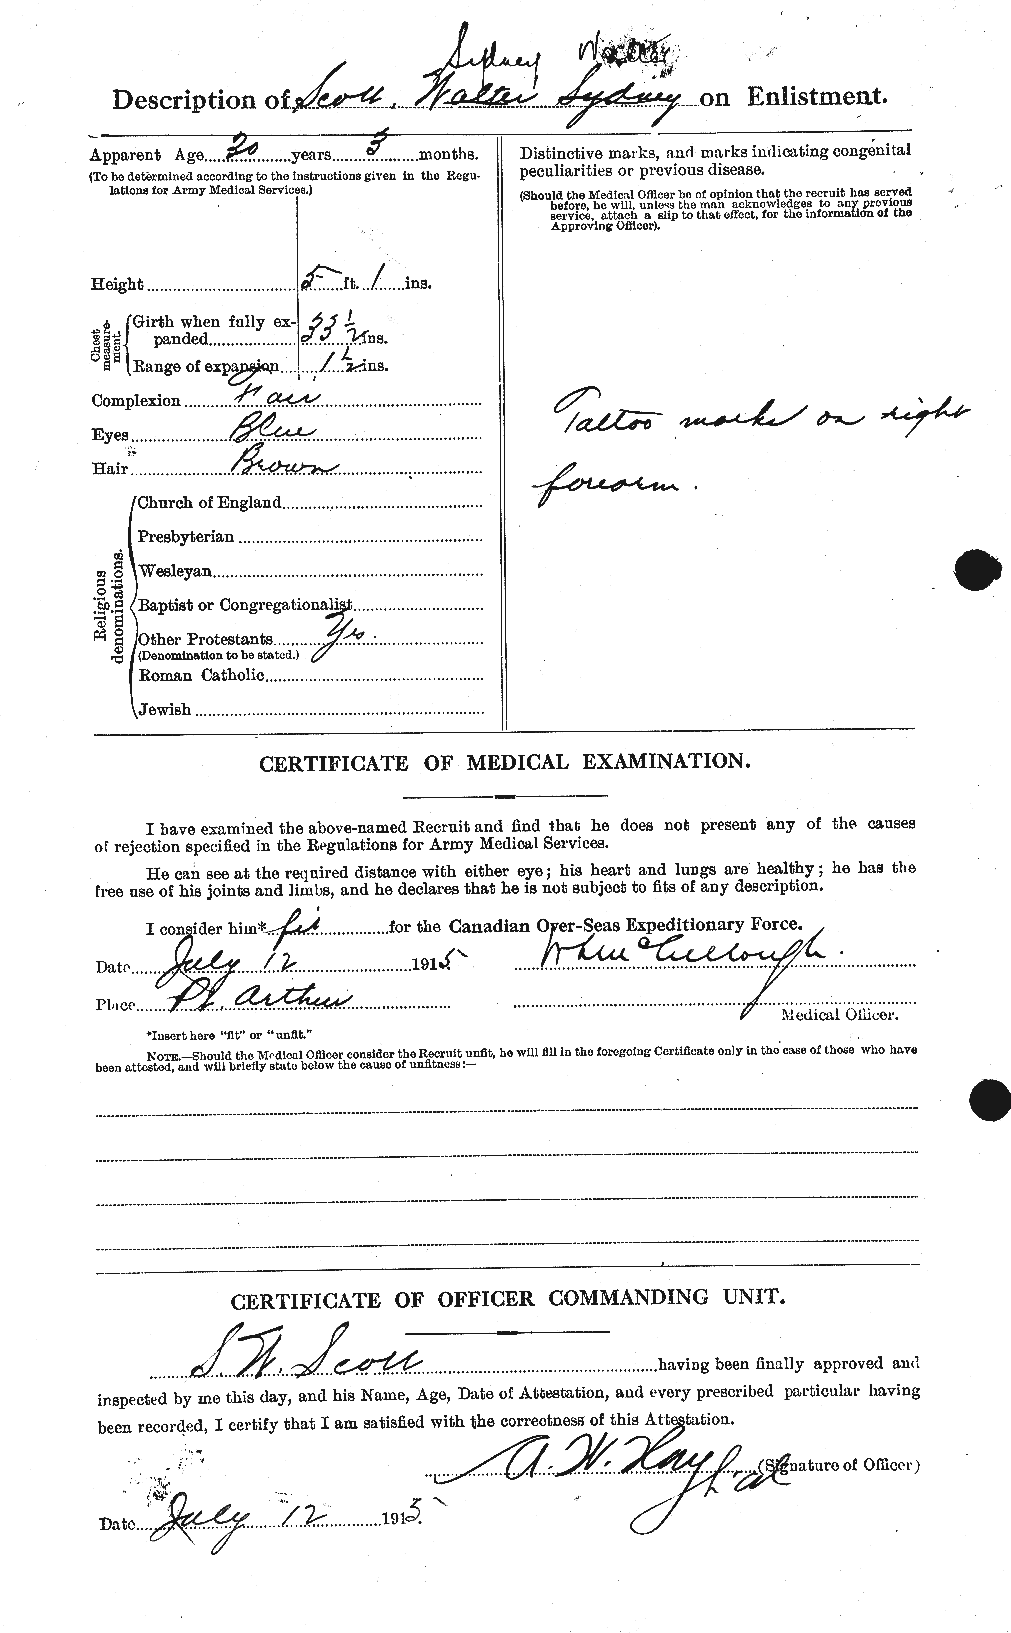 Personnel Records of the First World War - CEF 088548b